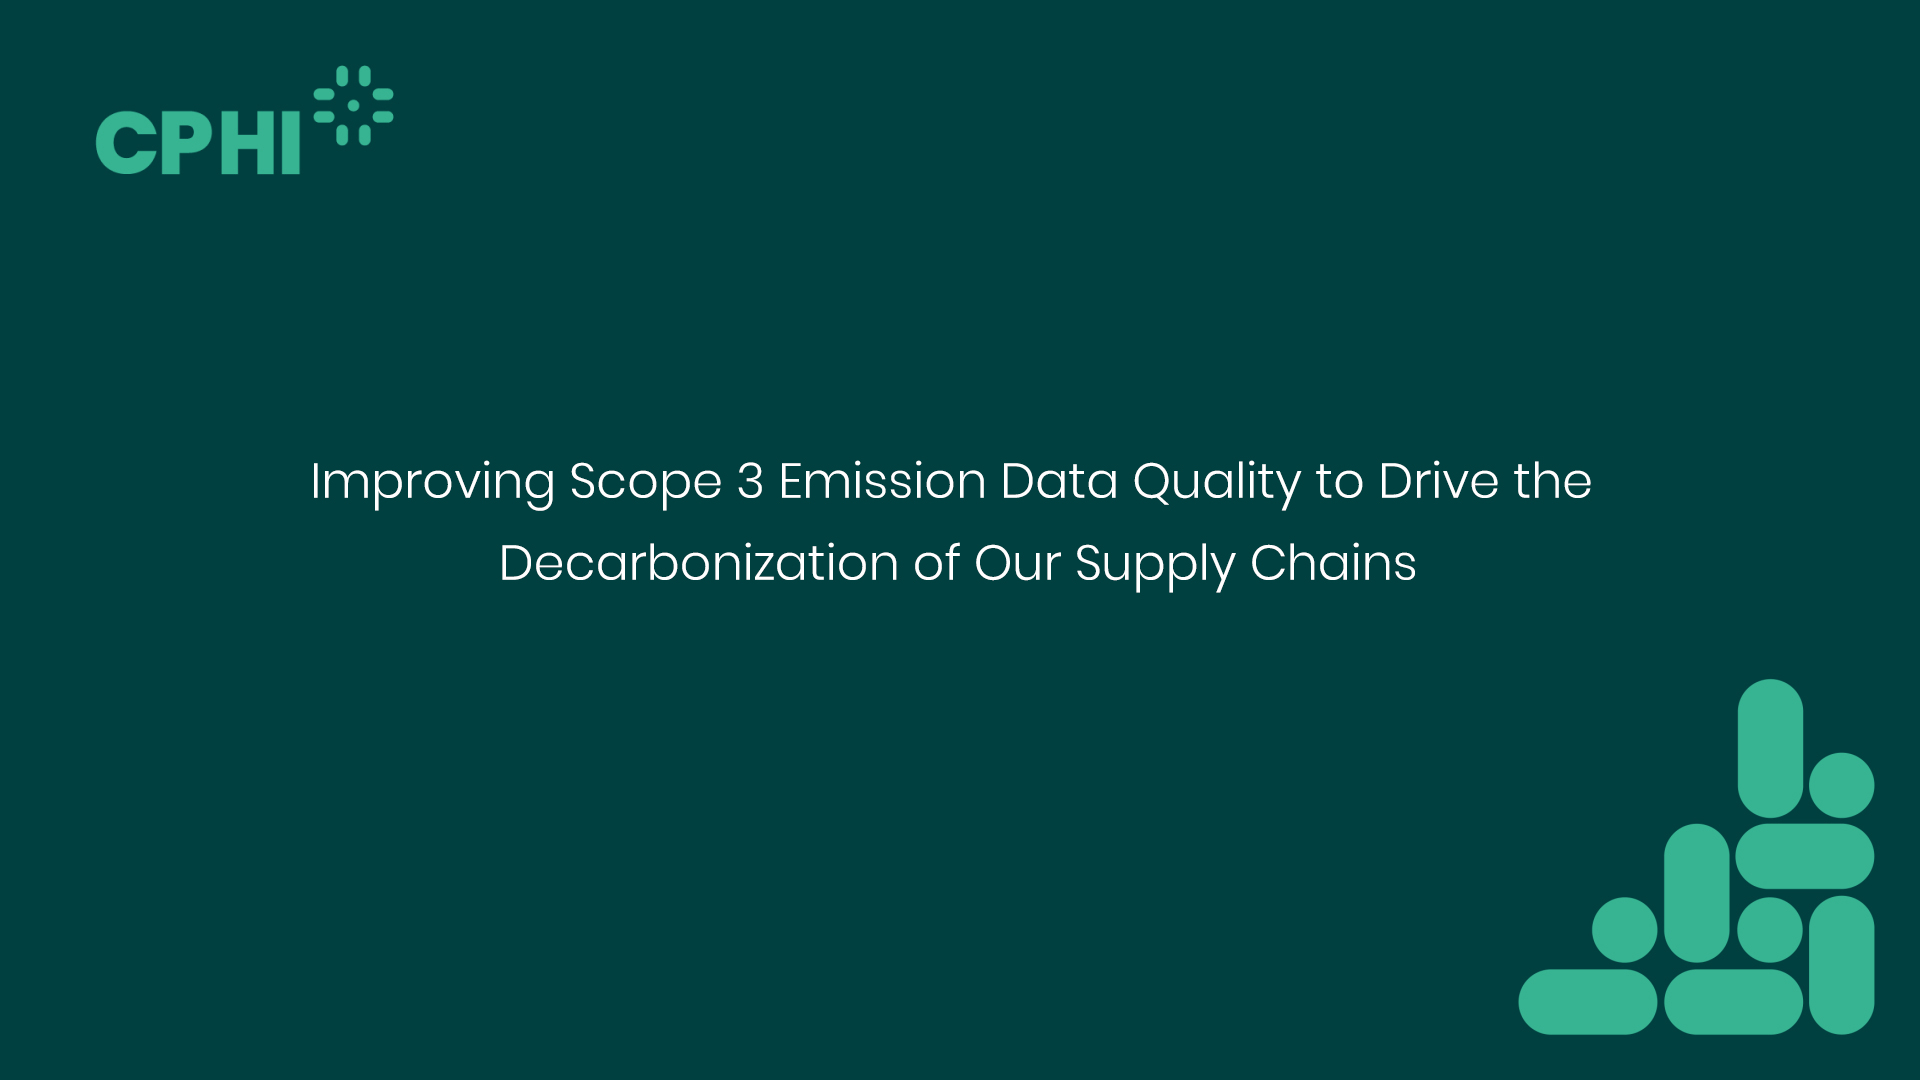 Improving Scope 3 Emission Data Quality to Drive the Decarbonization of Our Supply Chains